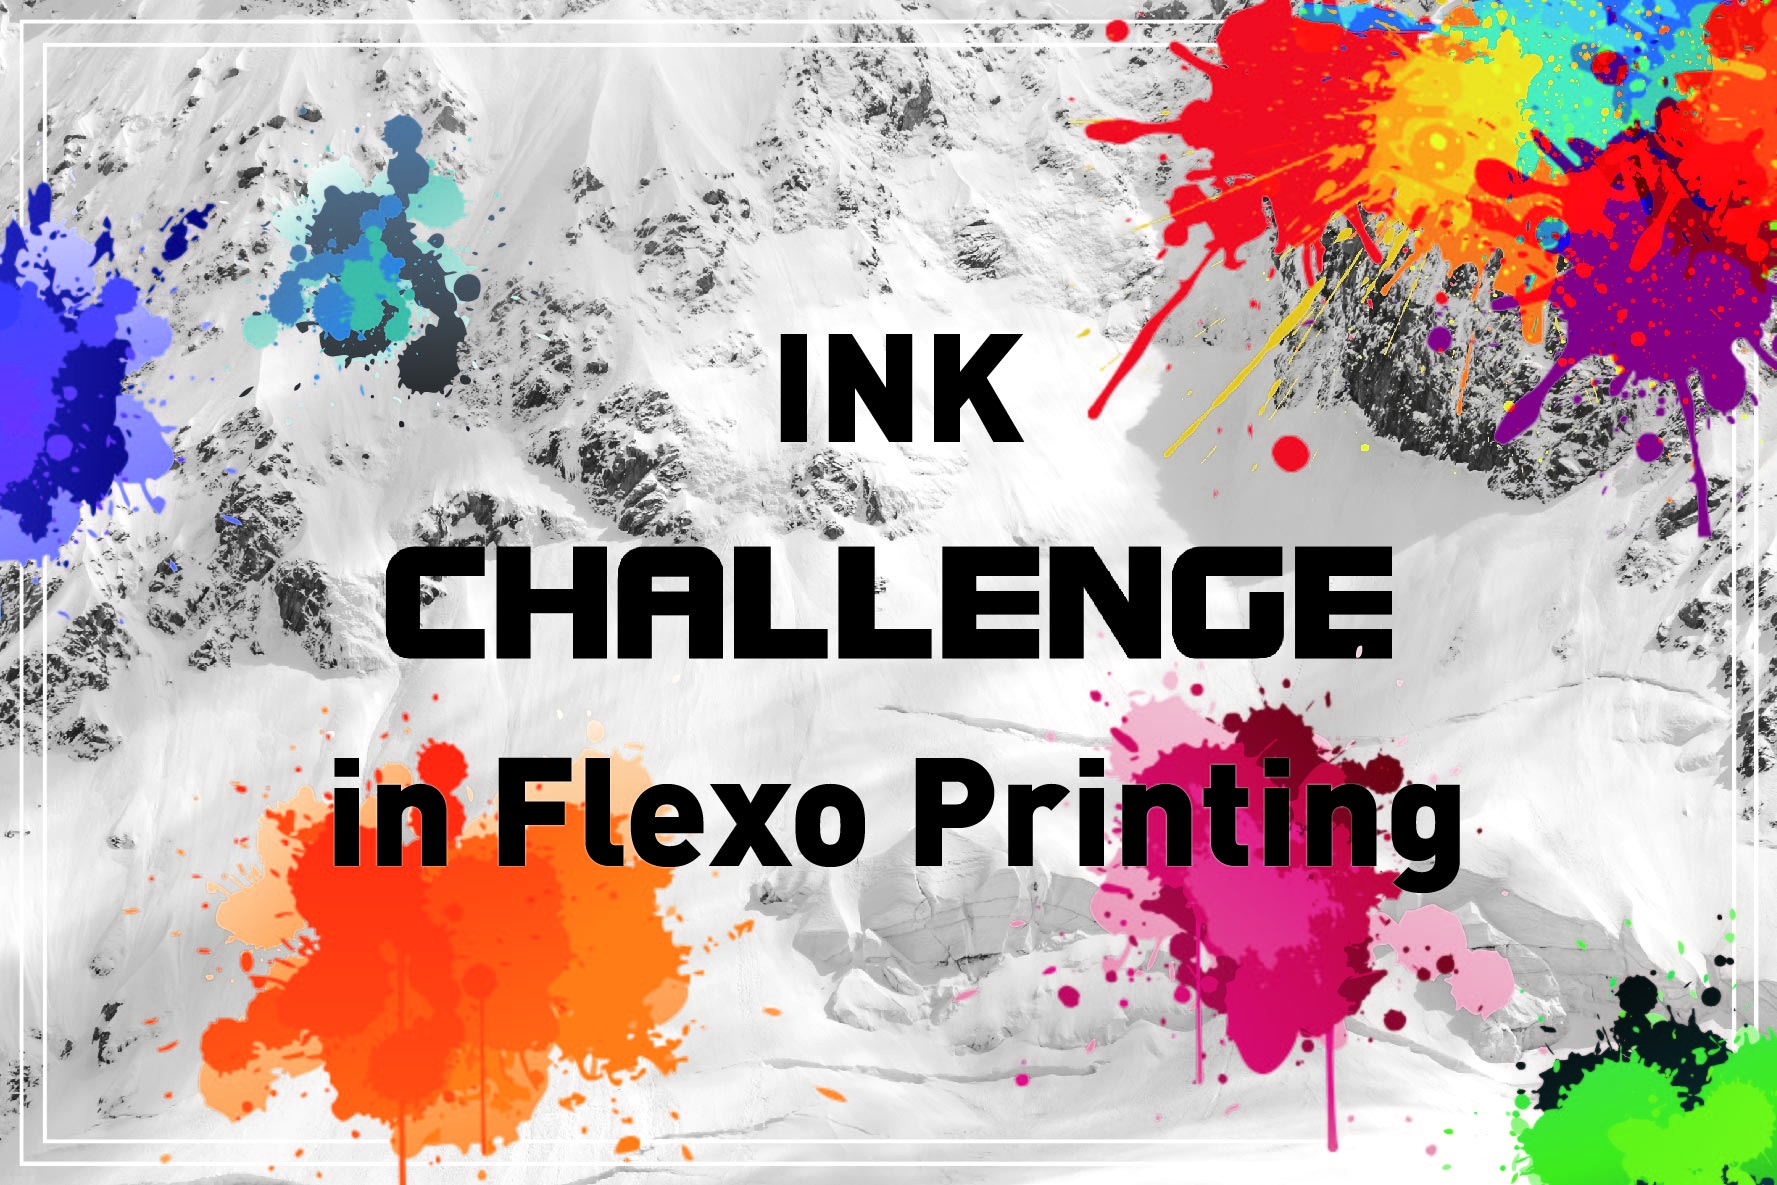 Ink challenges in printing